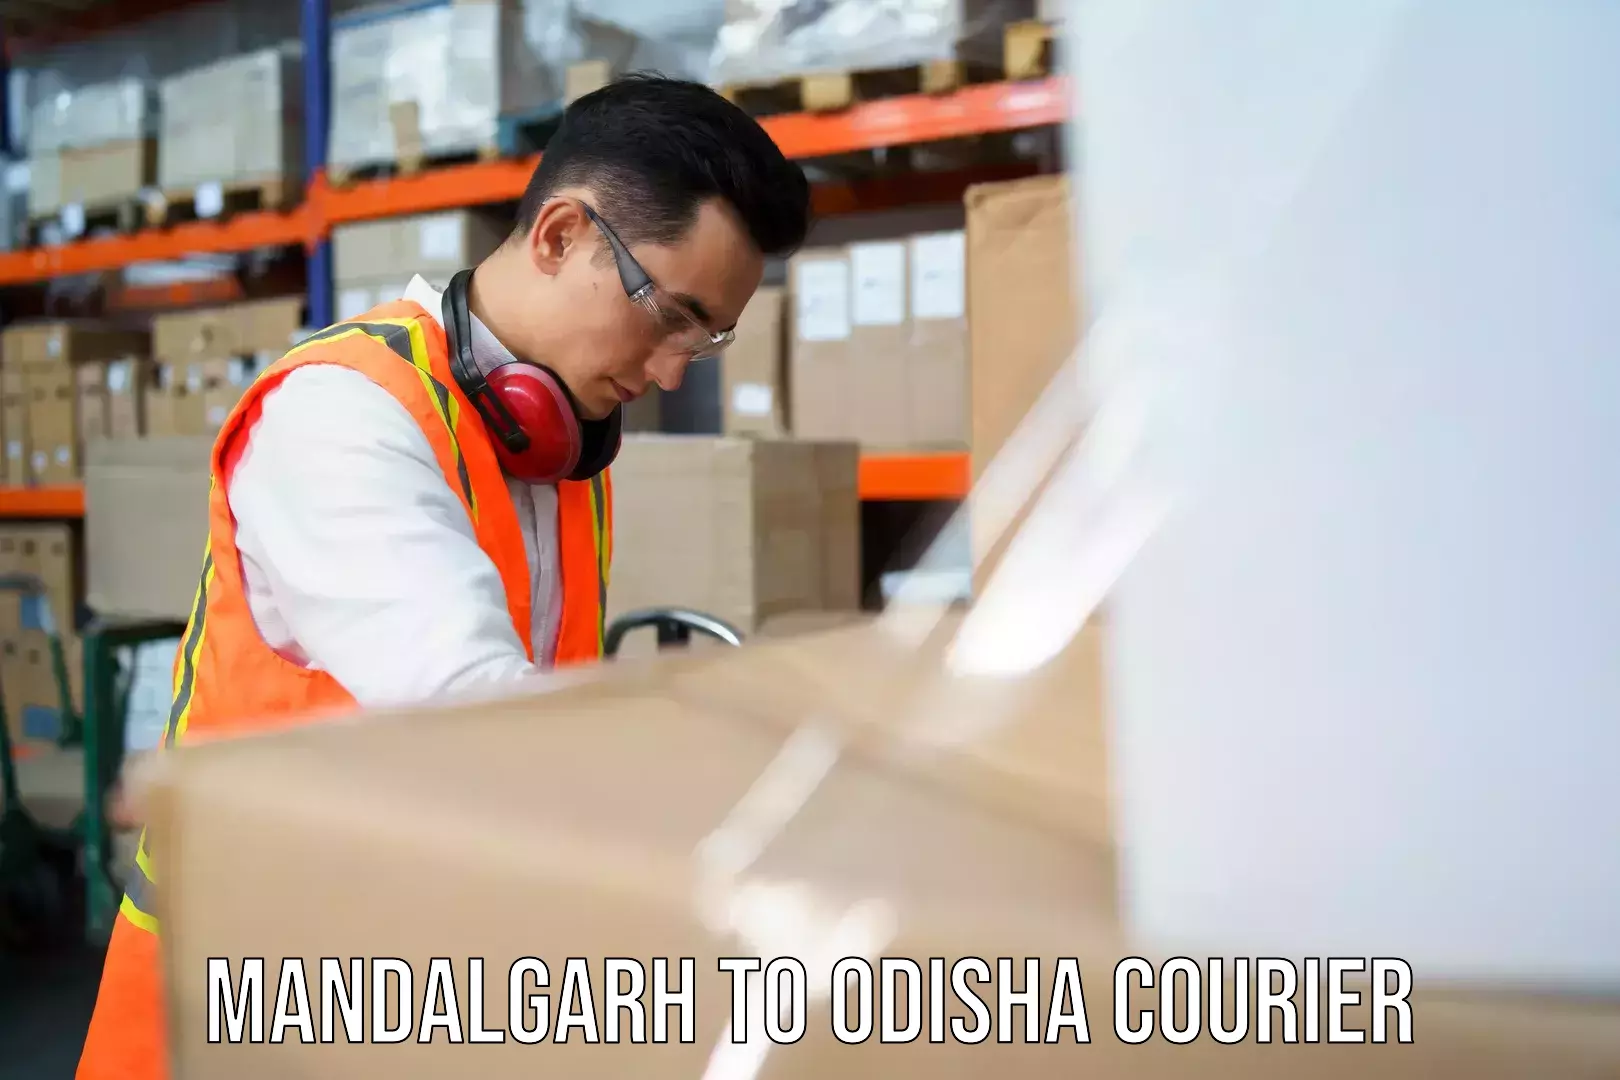 State-of-the-art courier technology Mandalgarh to Anandapur